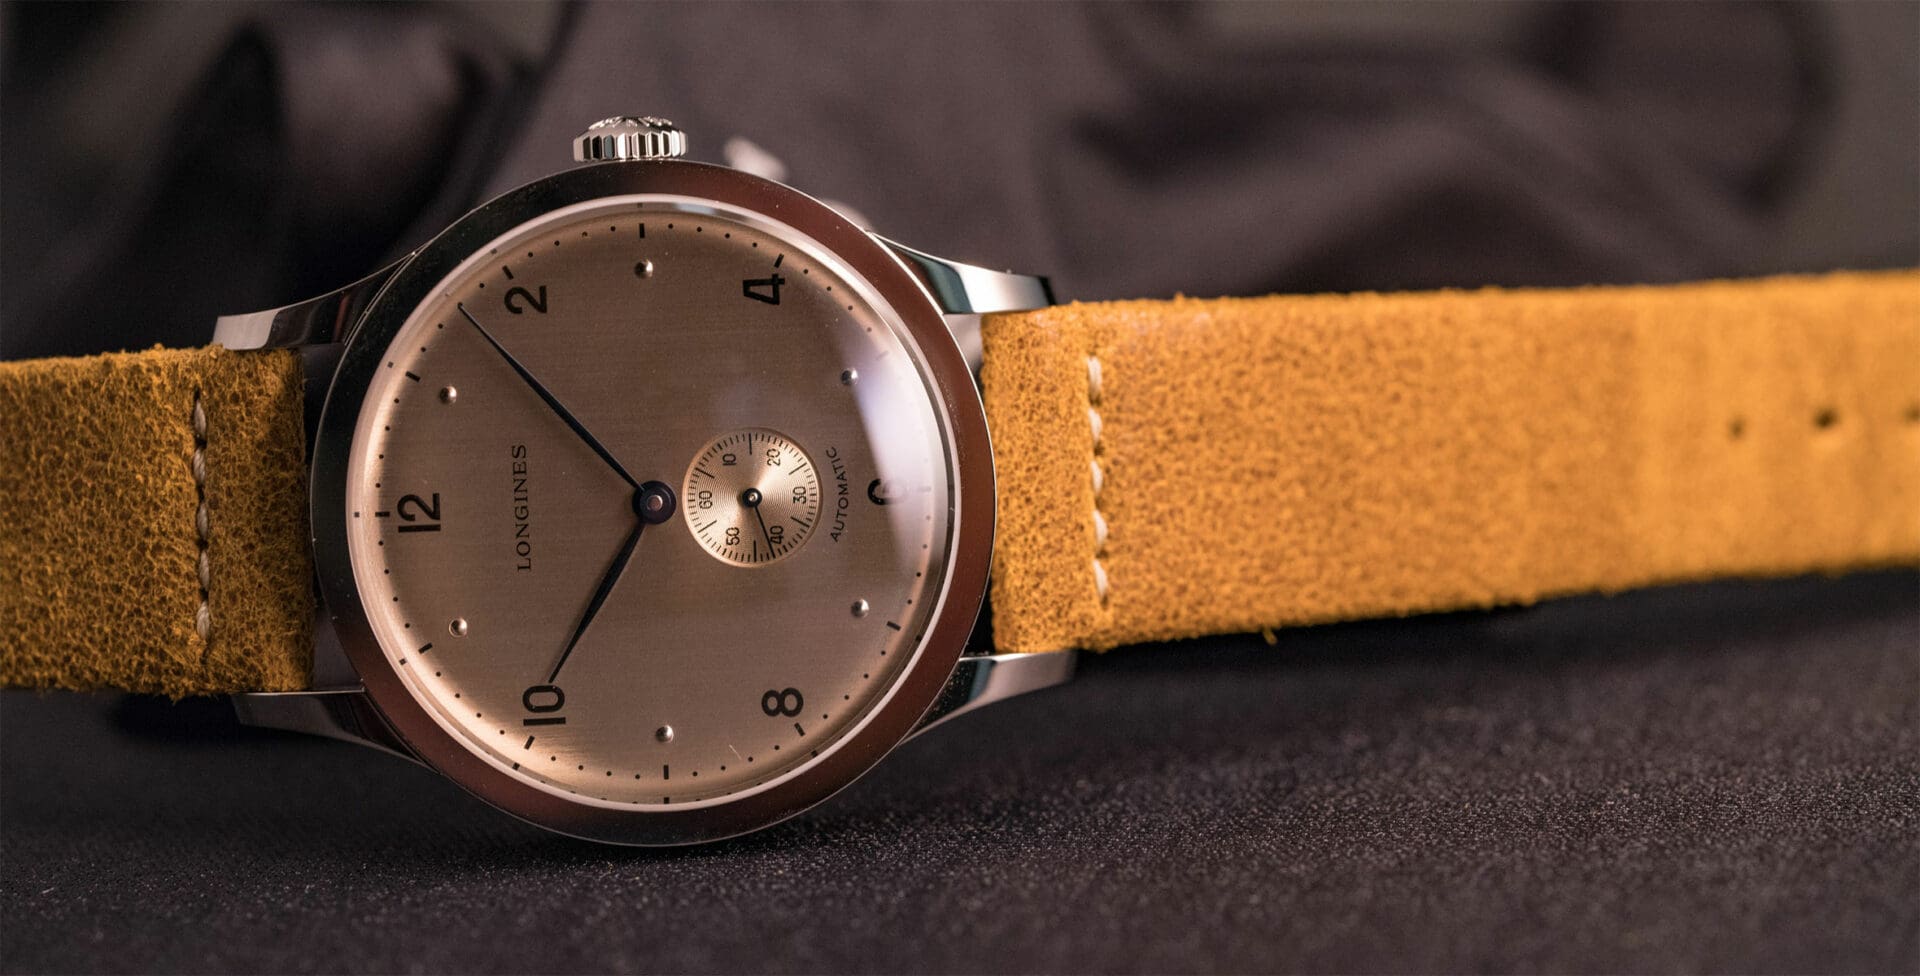 HANDS-ON: The Longines Heritage 1945